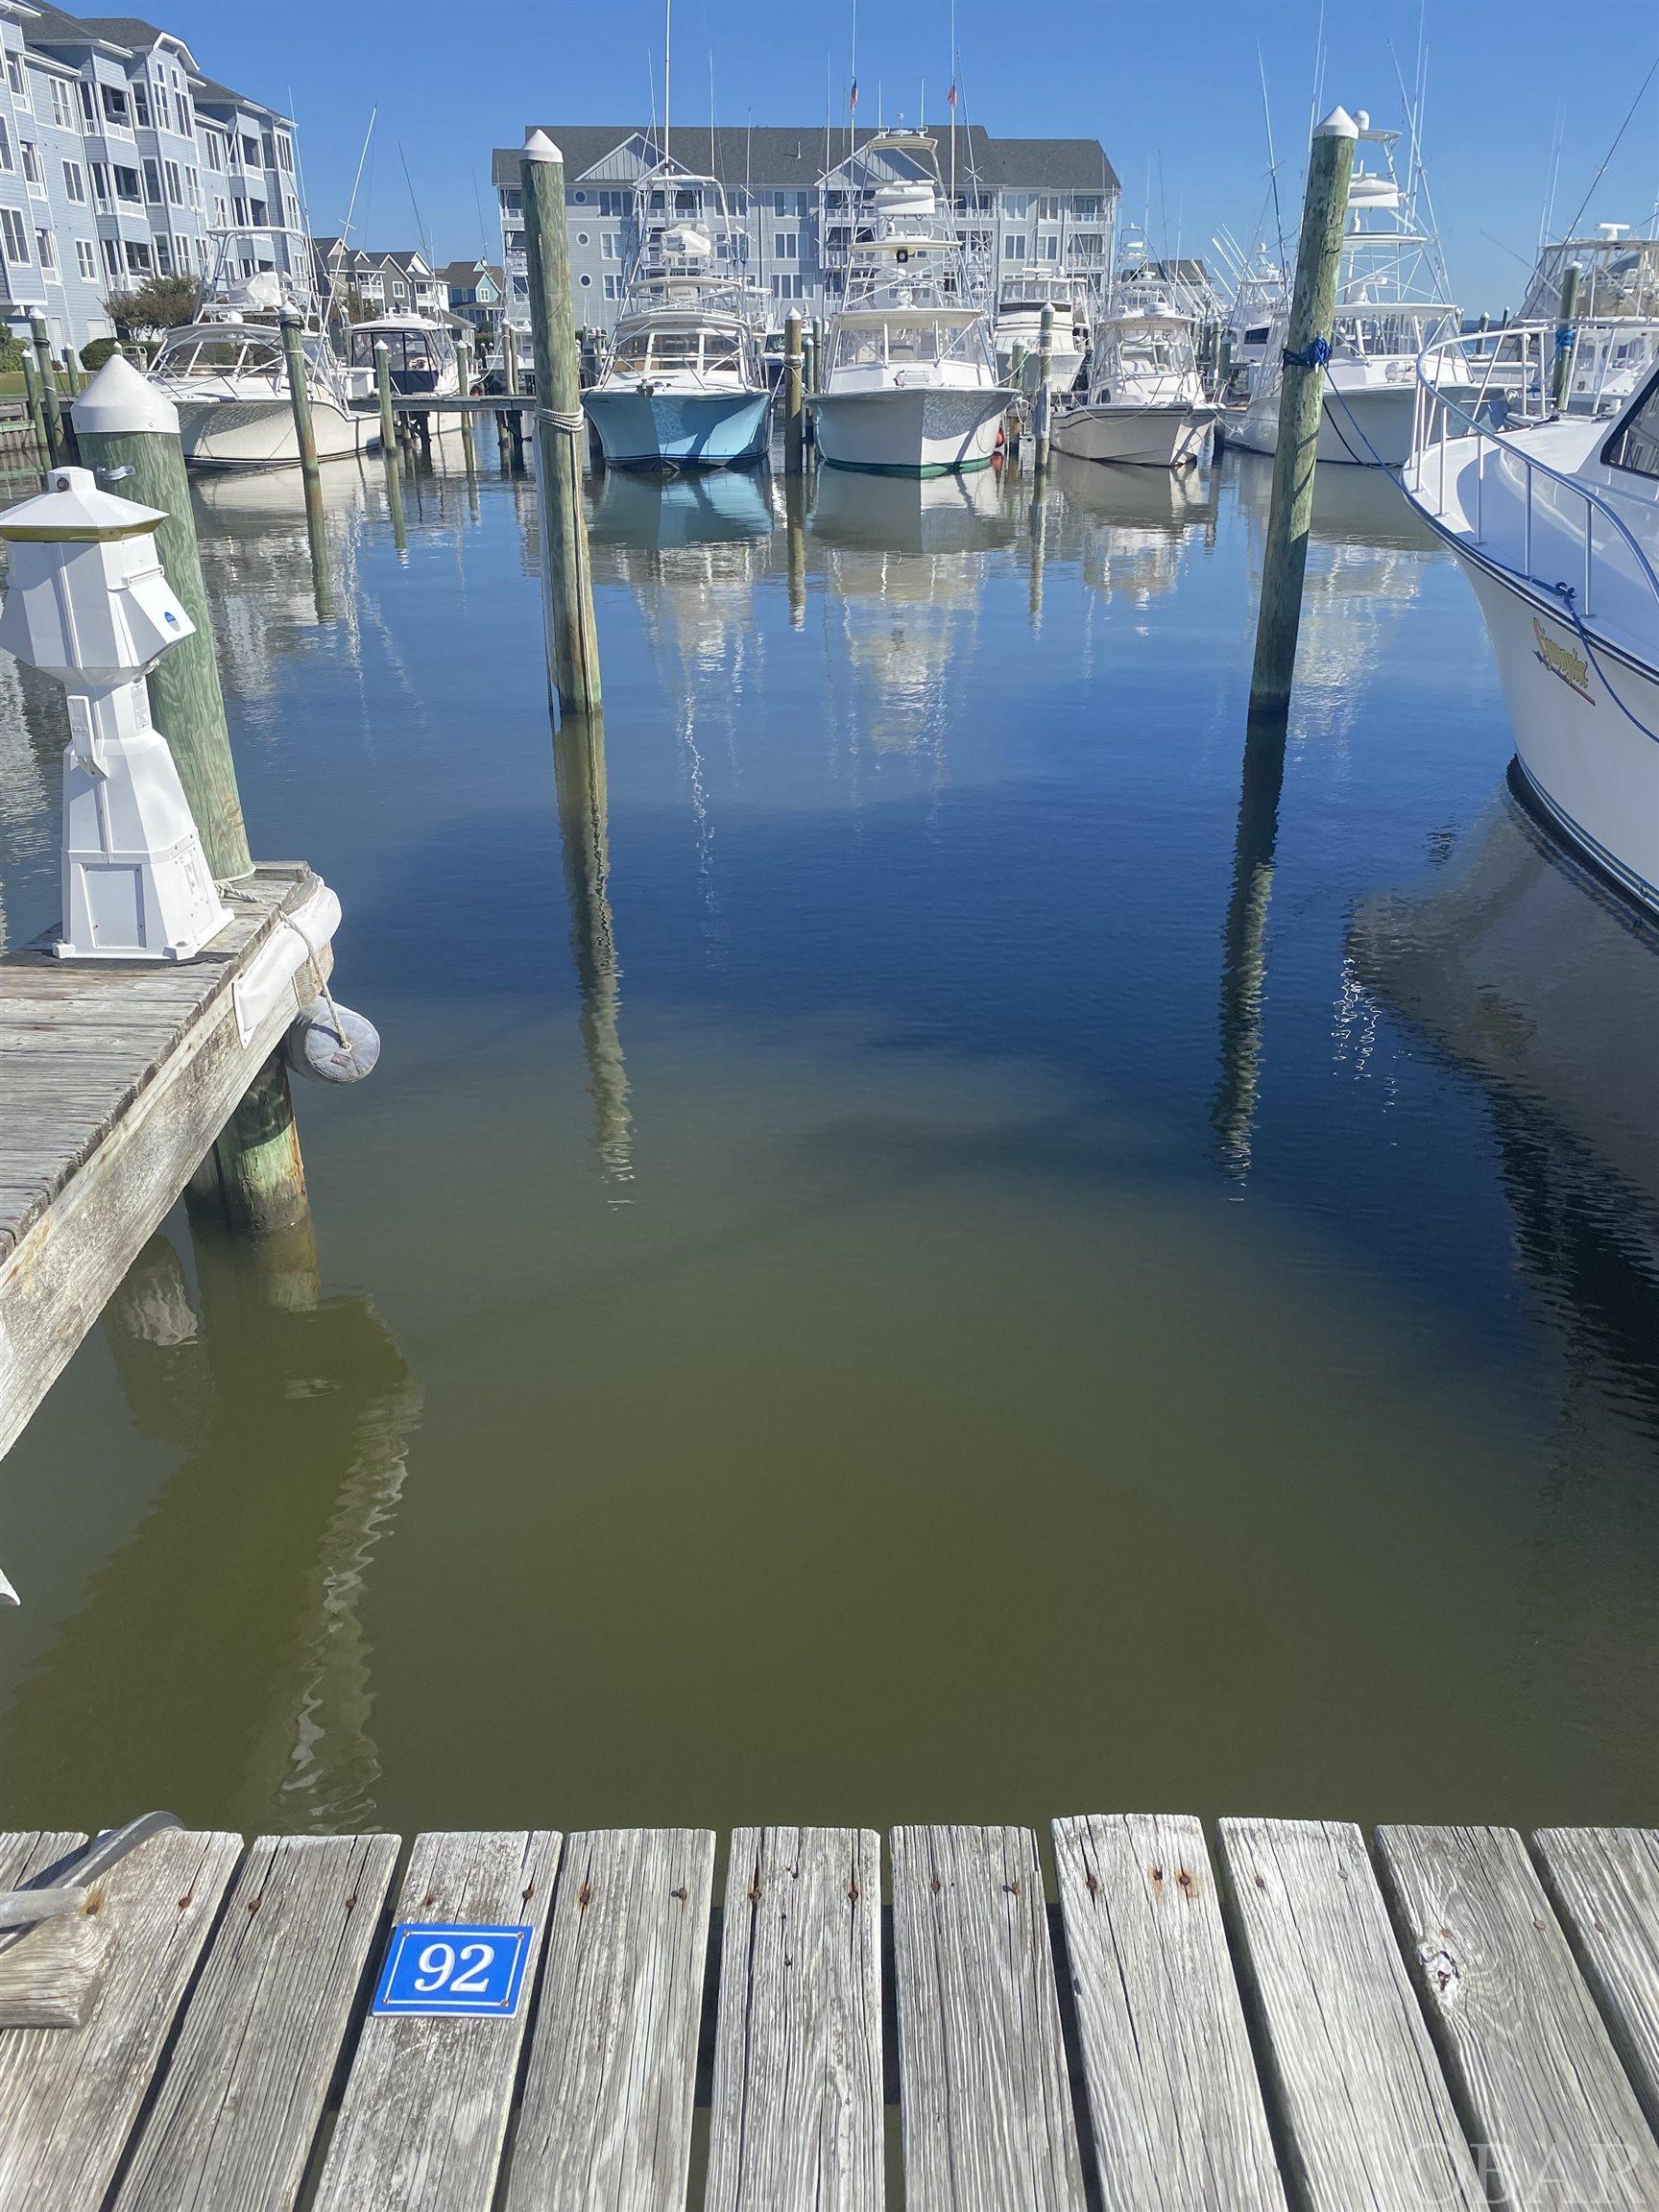 Located on B Dock, this 45FT. X 16FT boat slip has location value with parking, close to the Tiki Bar, full service restaurant, and Ship's store. Slips have in-slip fueling, private fish cleaning houses, and showers. Come see what this World Class Marina and Yacht Club has to offer today!!